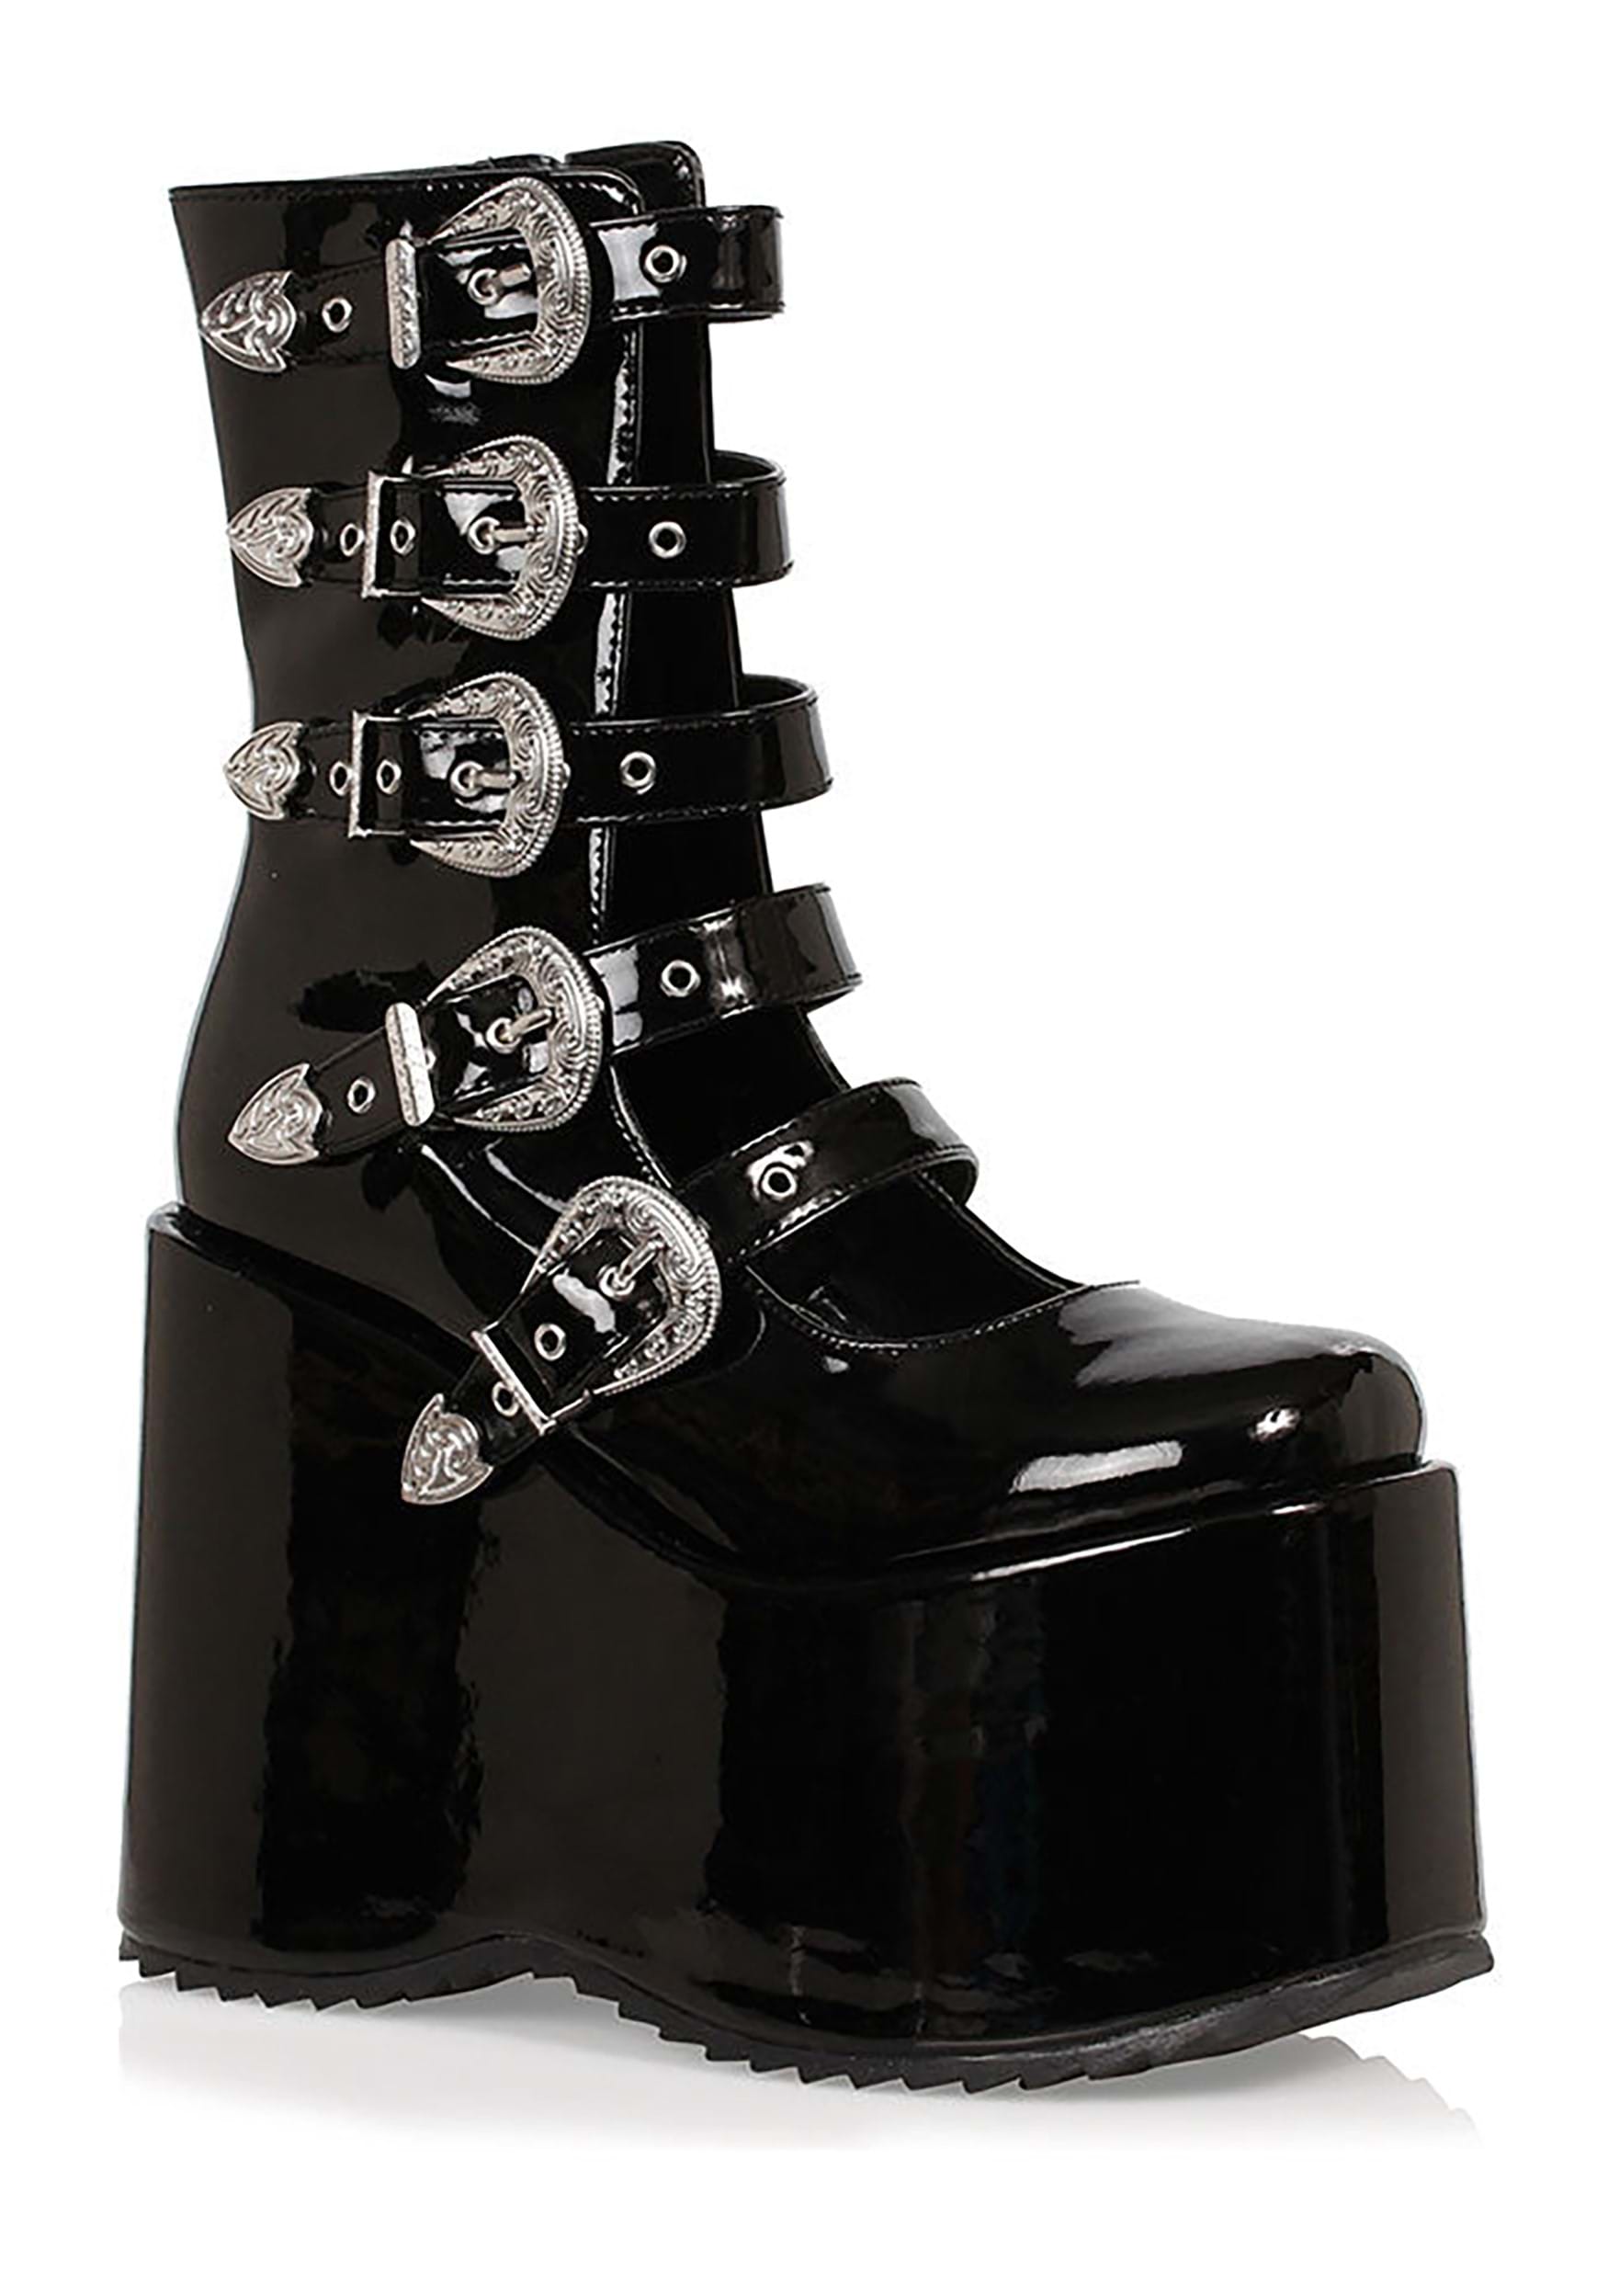 https://images.halloweencostumes.com/products/81865/1-1/womens-black-platform-buckle-strap-boots.jpg